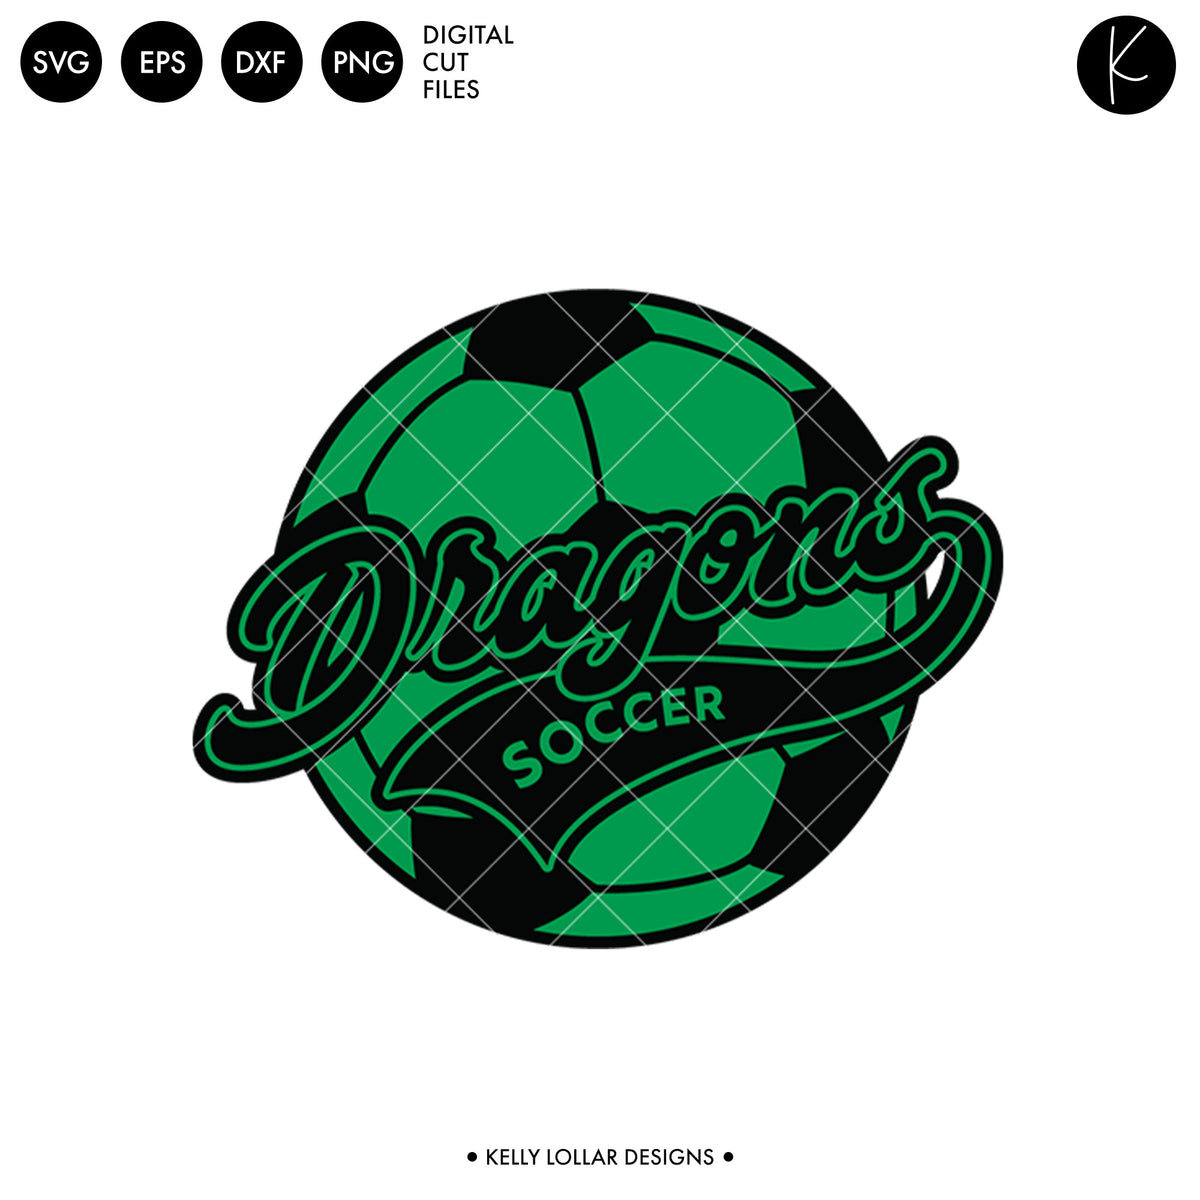 Dragons Soccer and Football Bundle | SVG DXF EPS PNG Cut Files